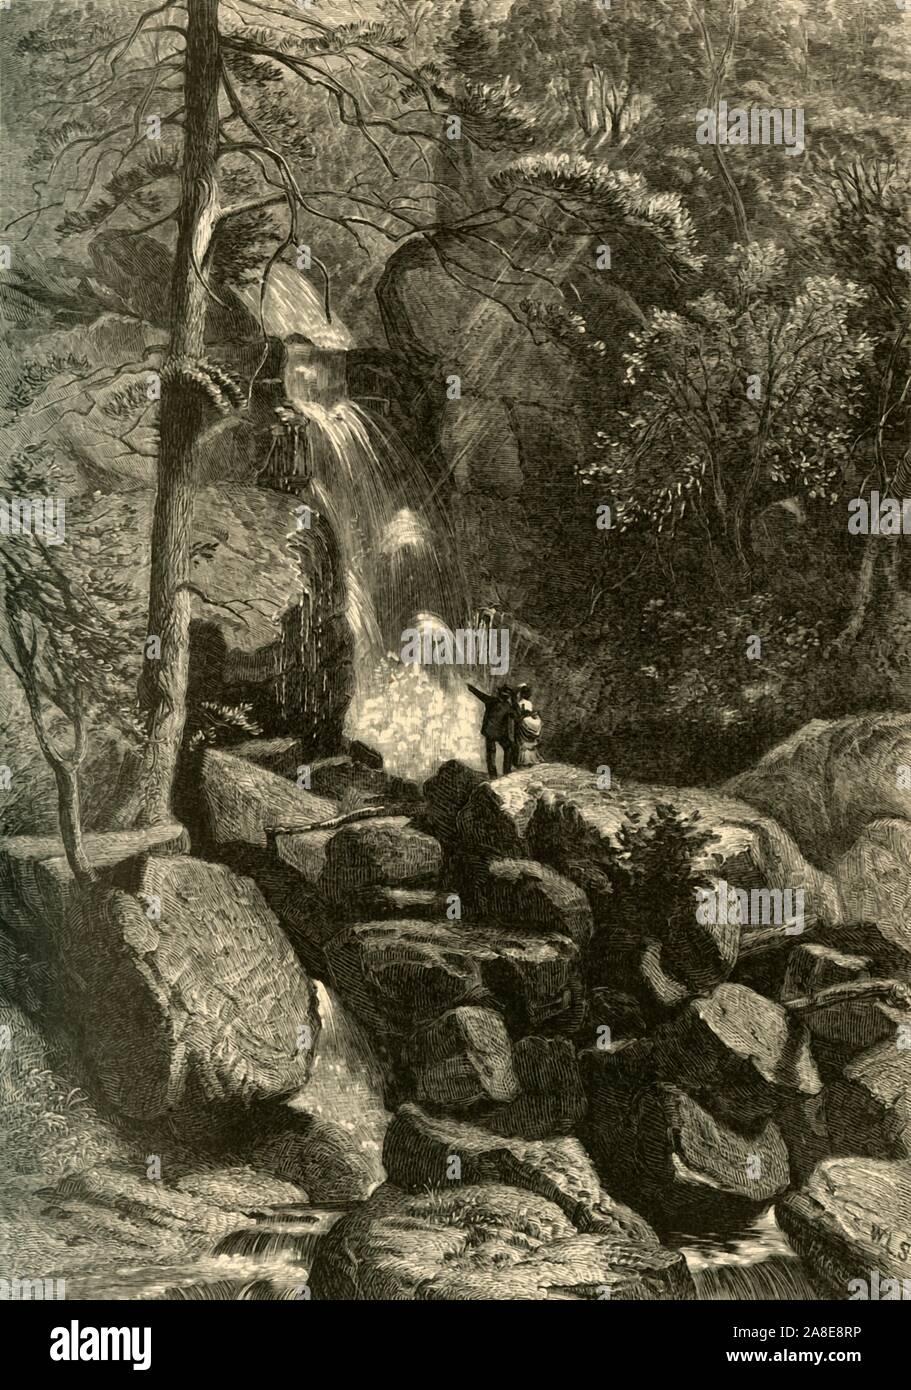 'Purgatory Falls, Head-Waters of the Roanoke', 1872. Waterfall at the source of the Roanoke River, Blue Ridge Mountains, Virginia, USA. From &quot;Picturesque America; or, The Land We Live In, A Delineation by Pen and Pencil of the Mountains, Rivers, Lakes...with Illustrations on Steel and Wood by Eminent American Artists&quot; Vol. I, edited by William Cullen Bryant. [D. Appleton and Company, New York, 1872] Stock Photo